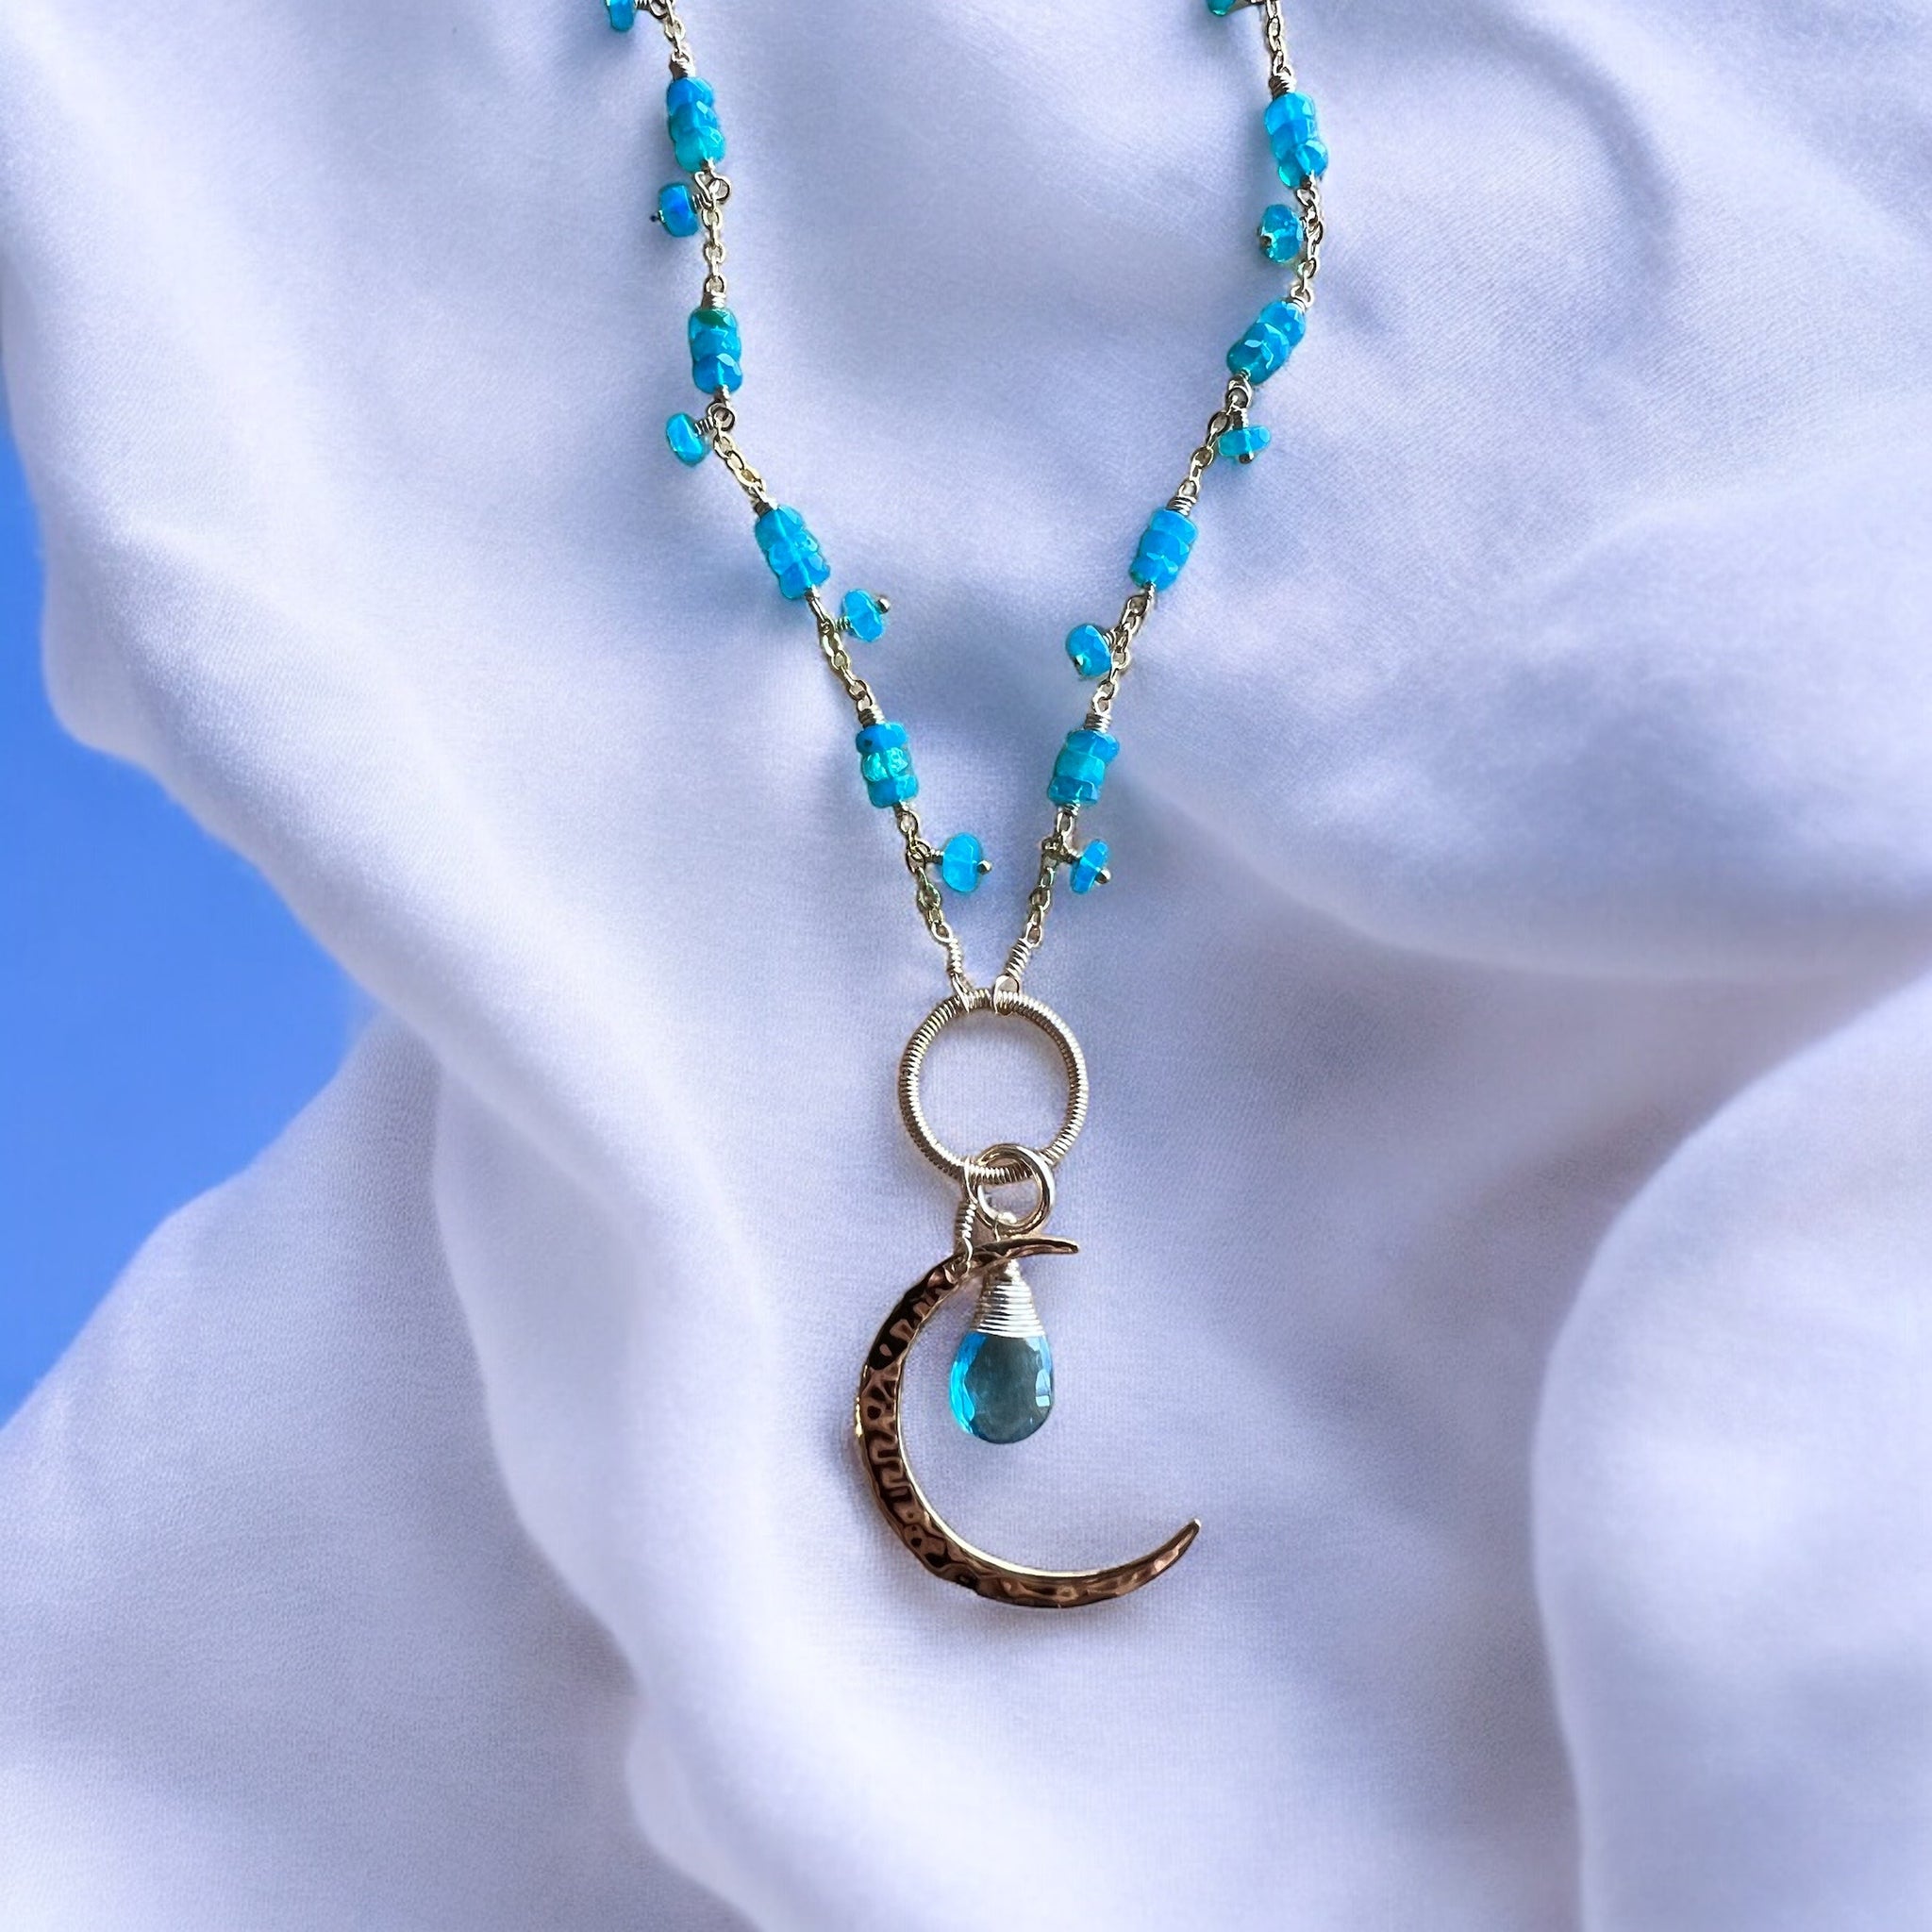 1704 - One of a Kind Gemstone Necklace